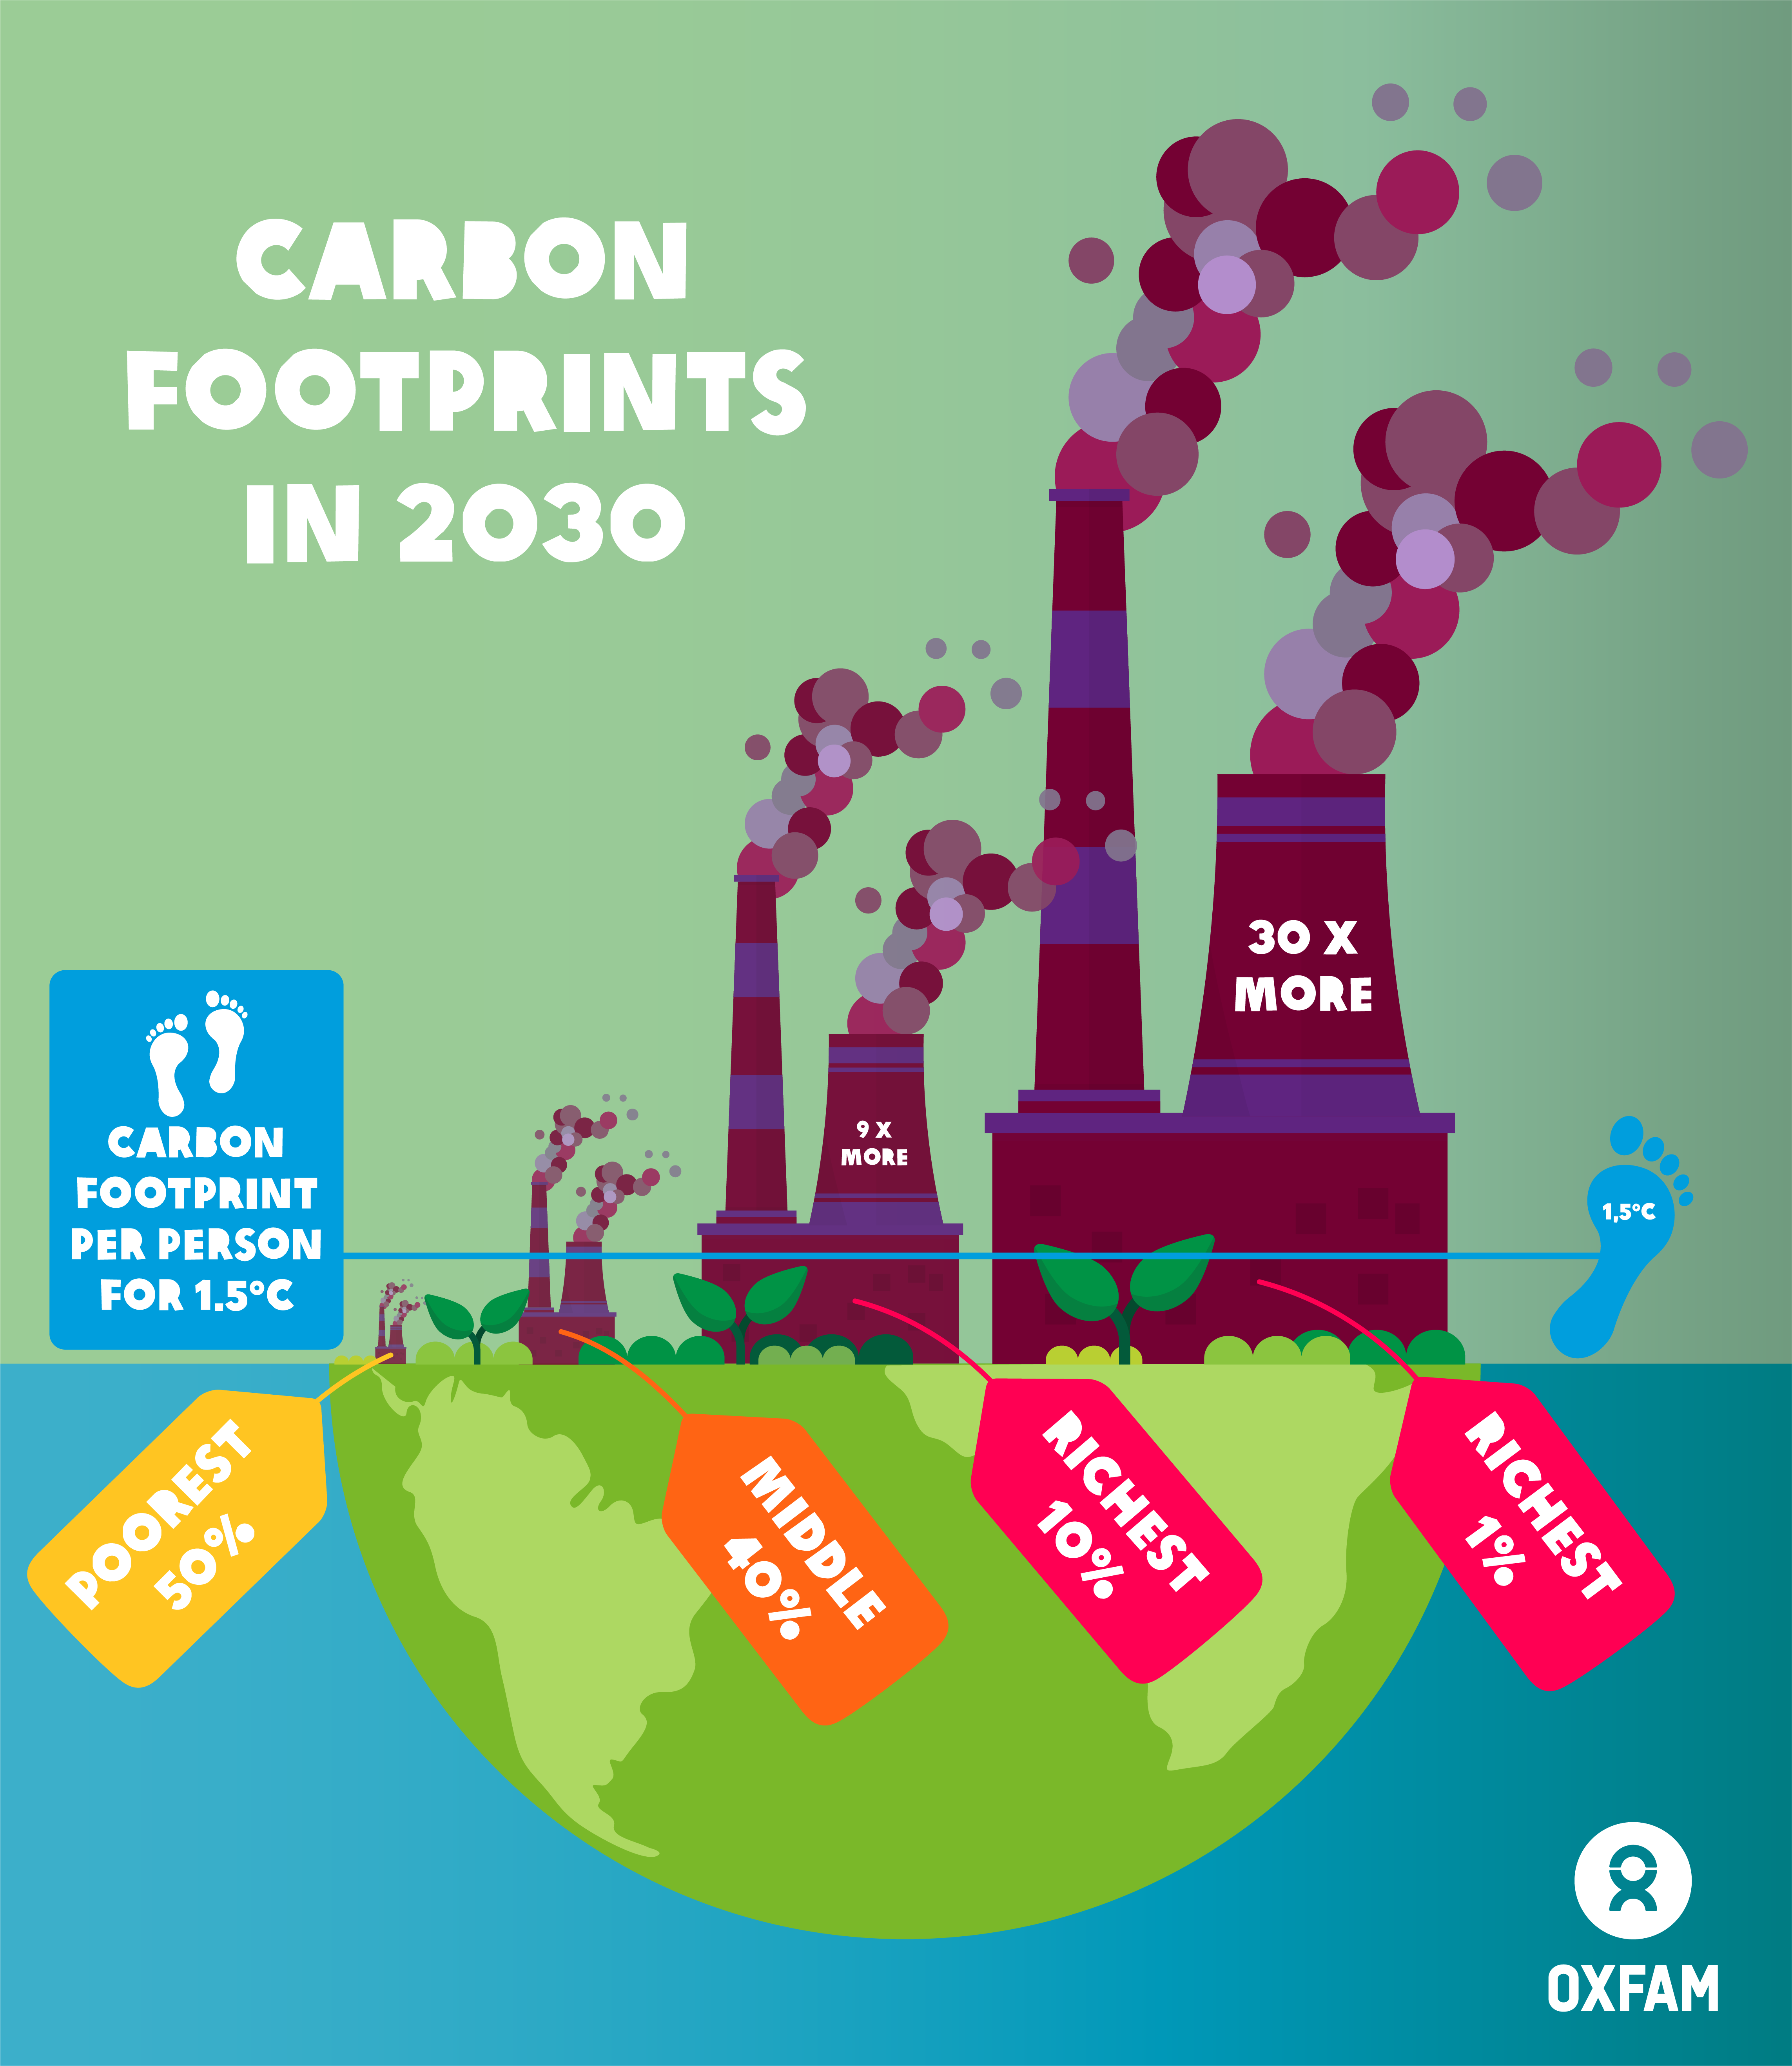 Carbon emissions of richest 1% set to be 30 times the 1.5°C limit in 2030